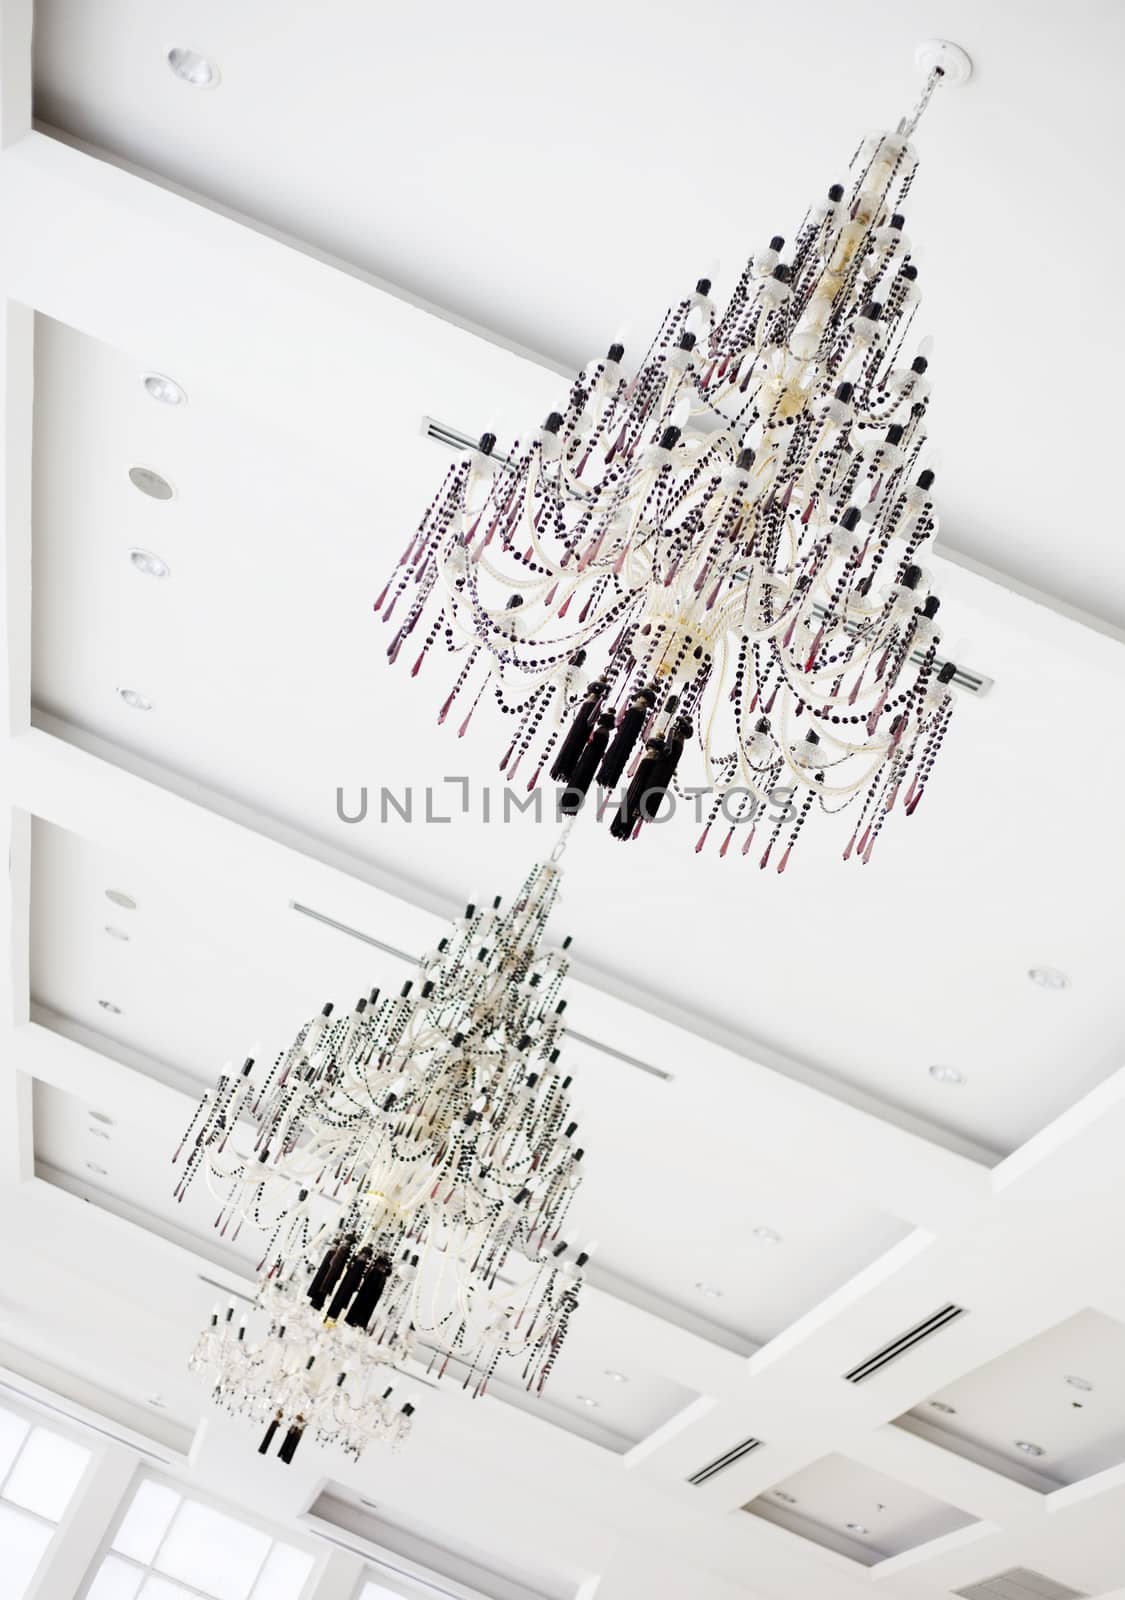 Two crystal chandeliers hanging on white ceiling by jarenwicklund